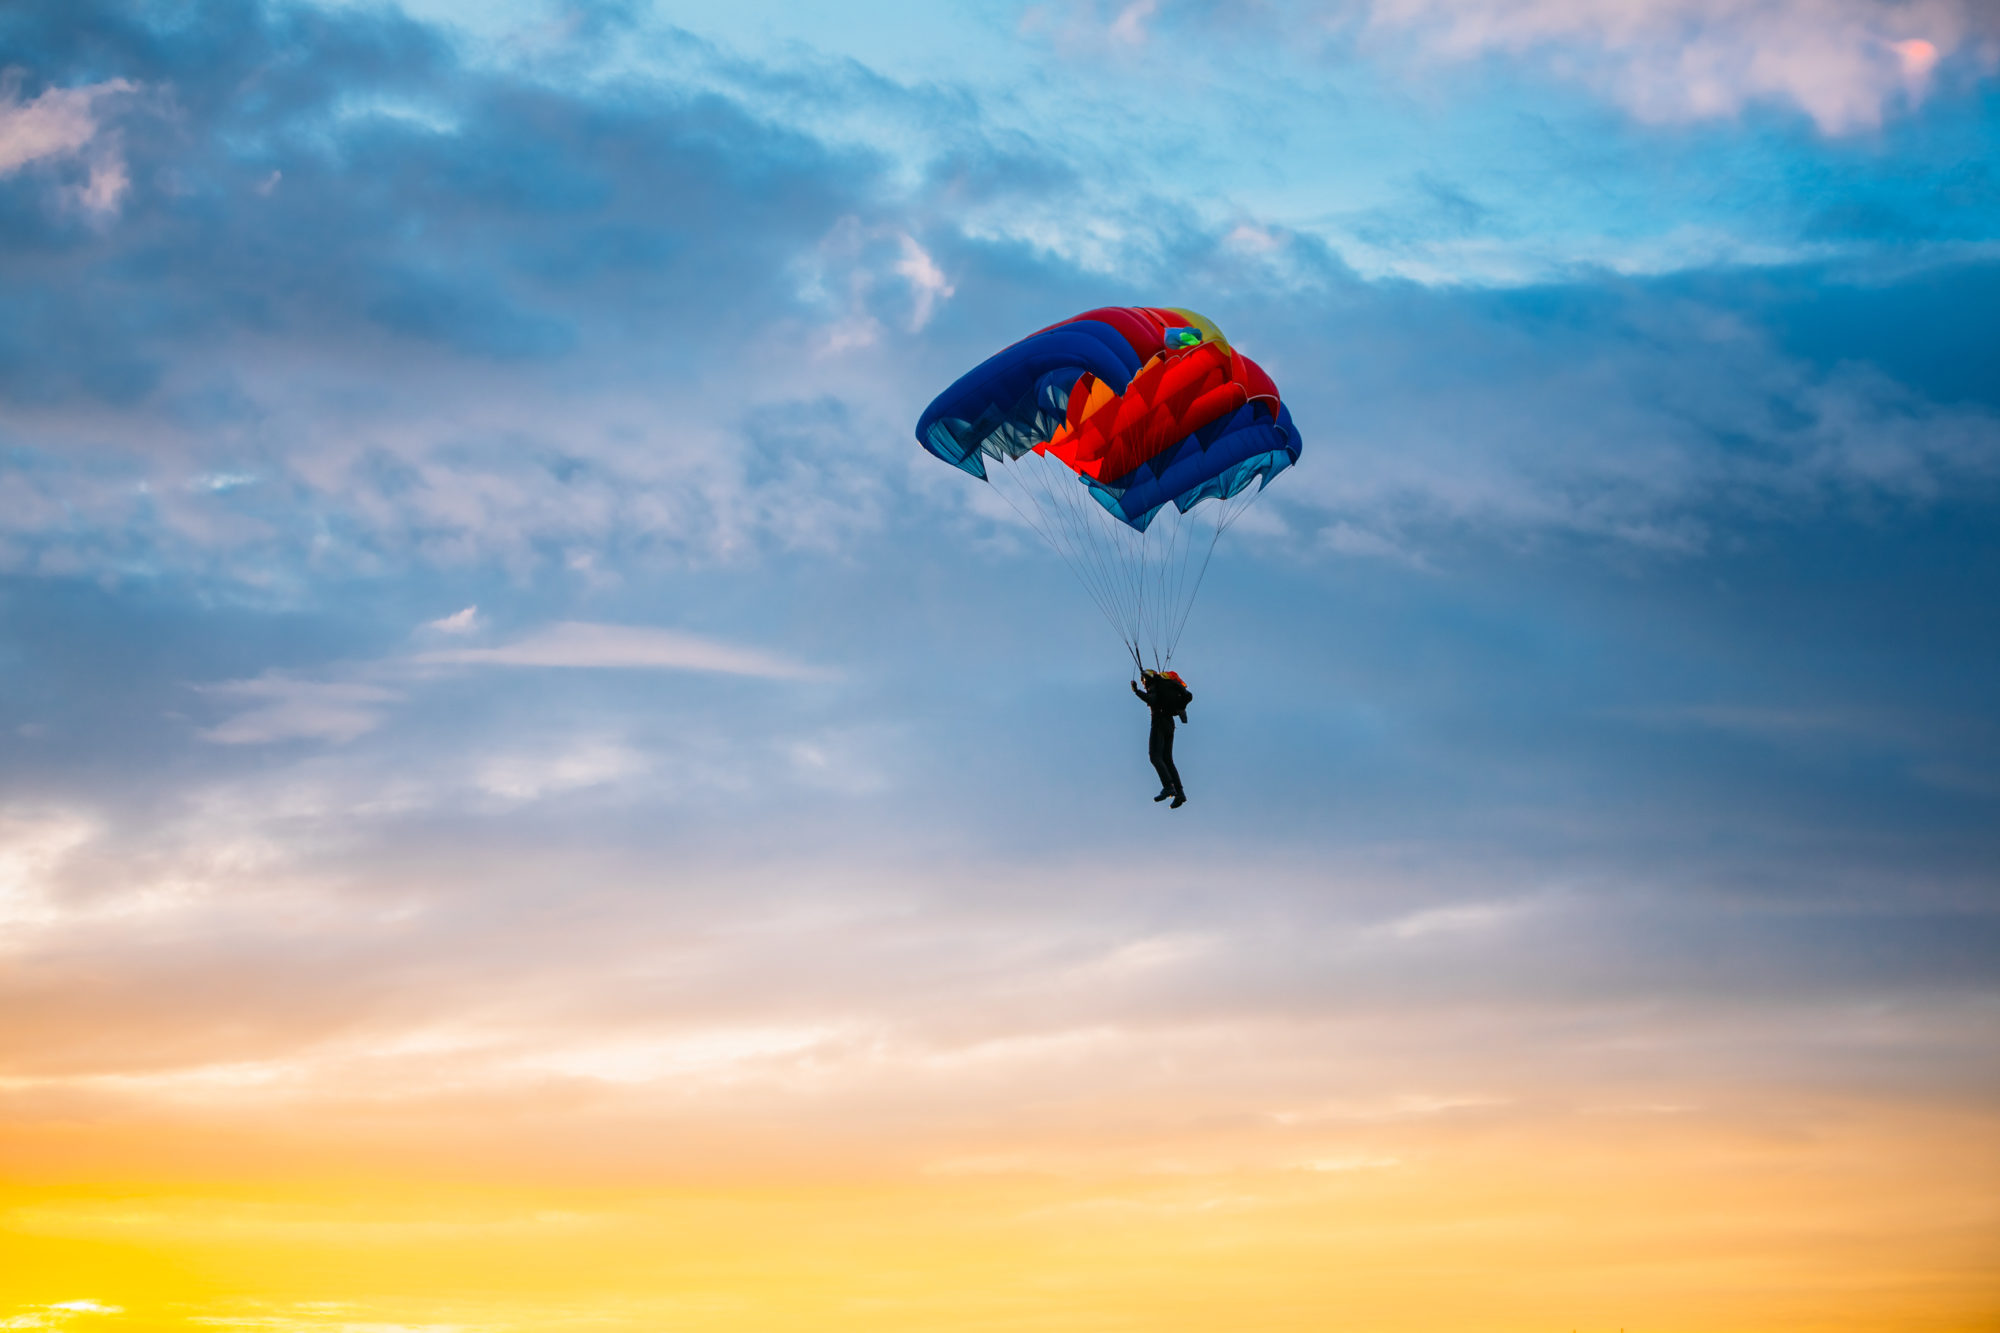 Some of the top sky diving locations are closer than you think! Get ready for the adventure of a life time.